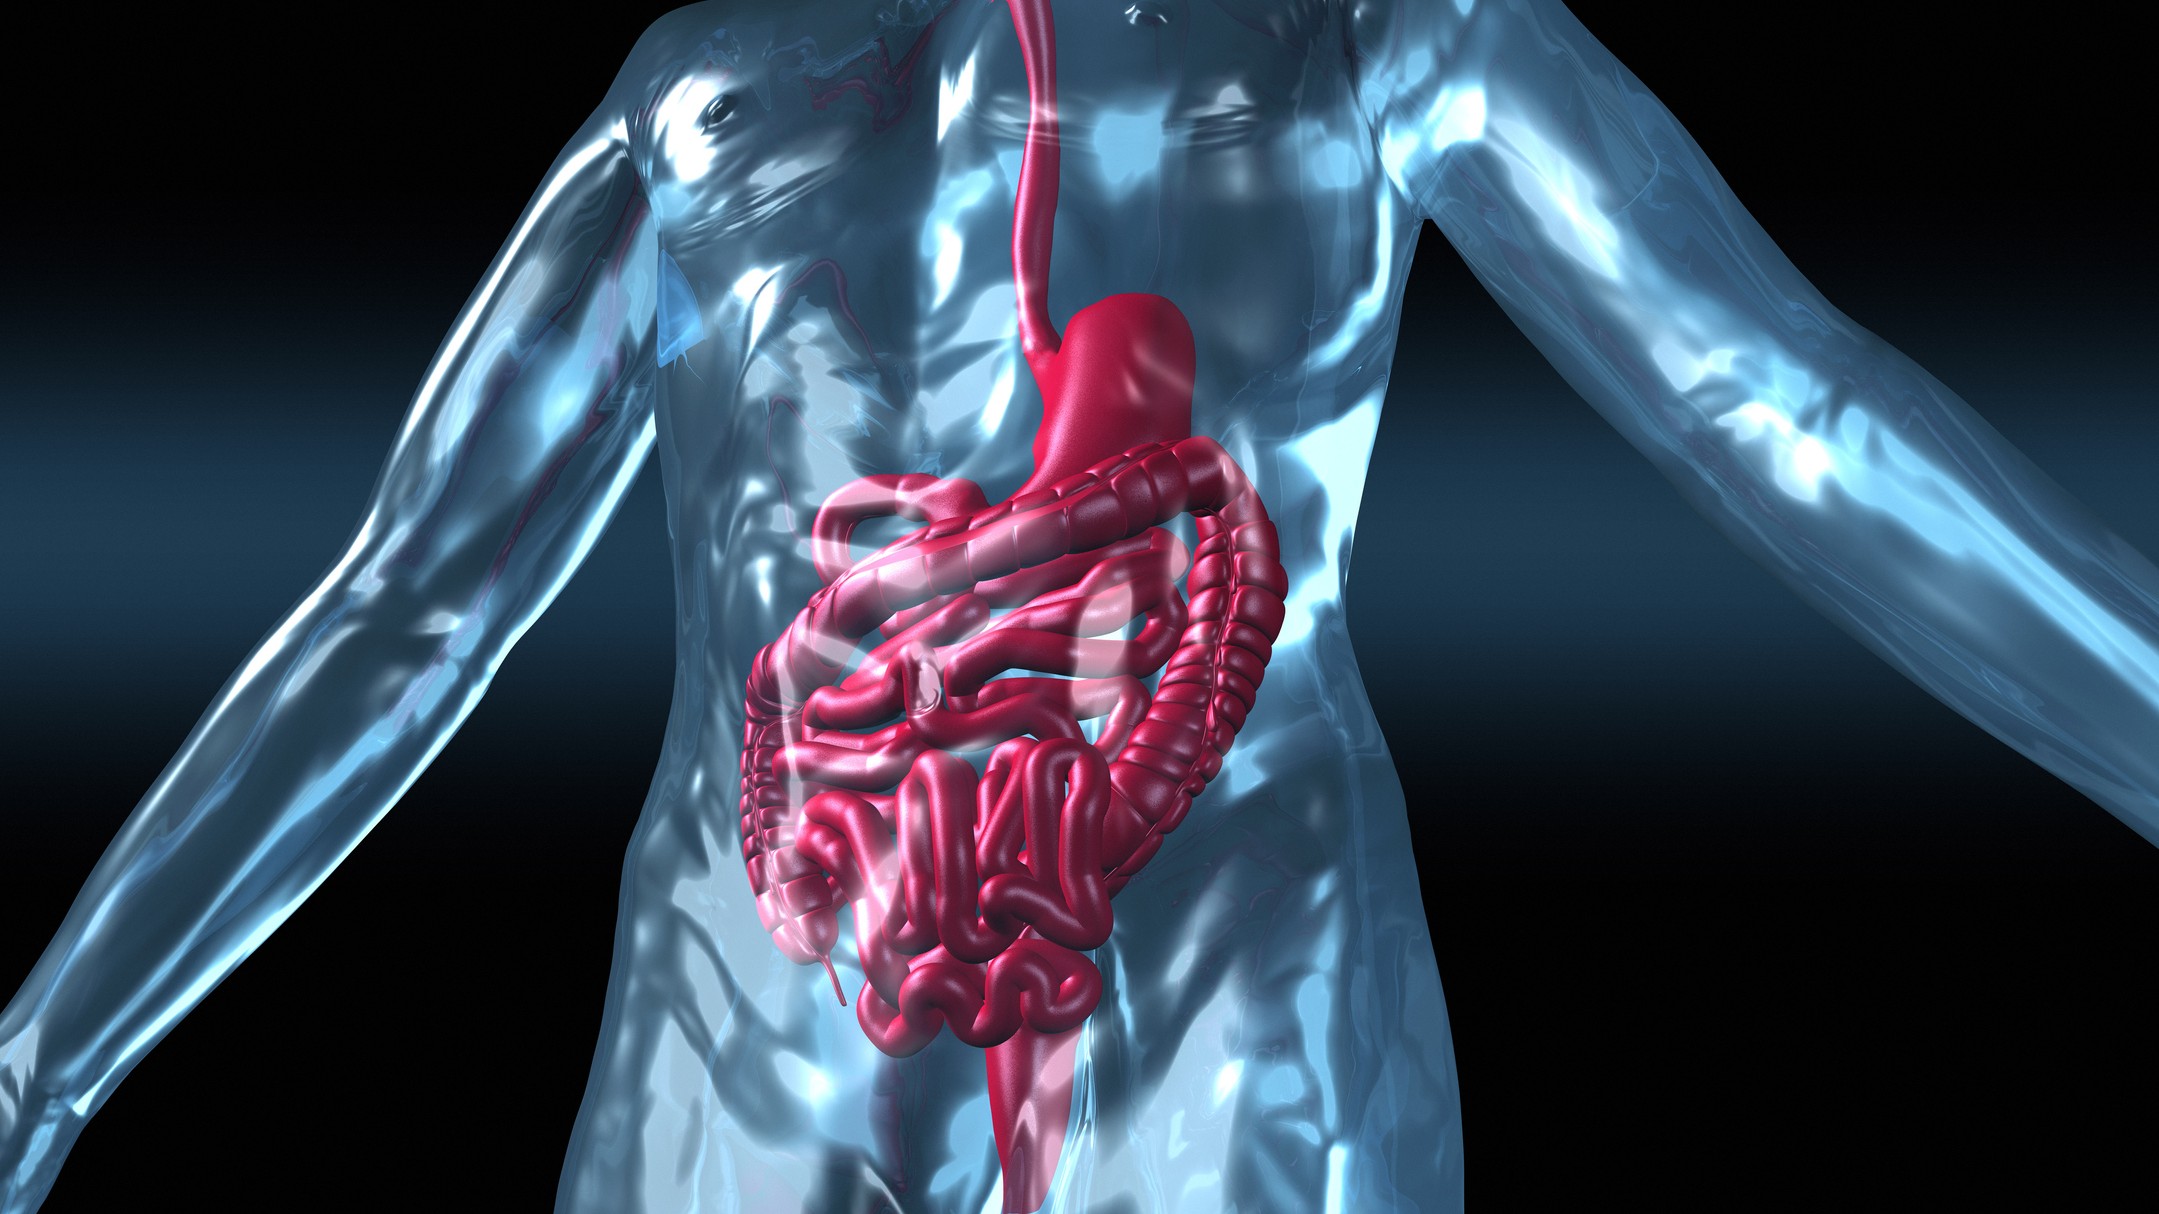 illustration showing the human gastrointestinal tract in the body